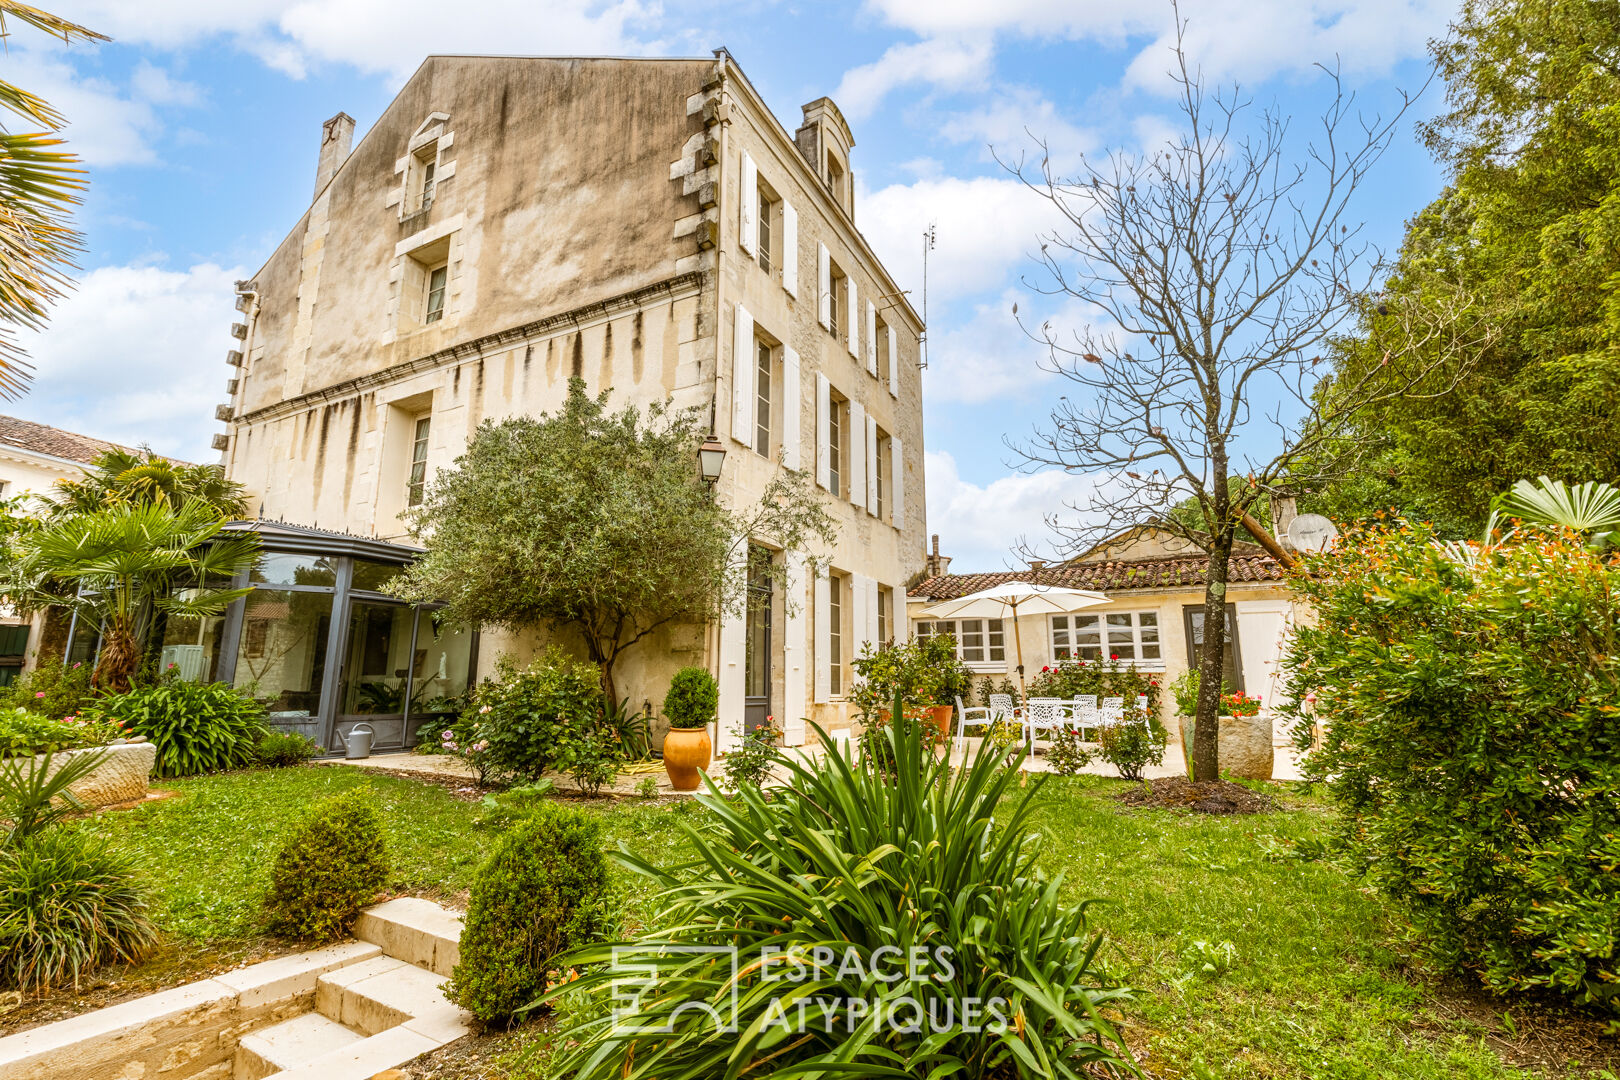 Bourgeois residence in the heart of the city and its bucolic garden